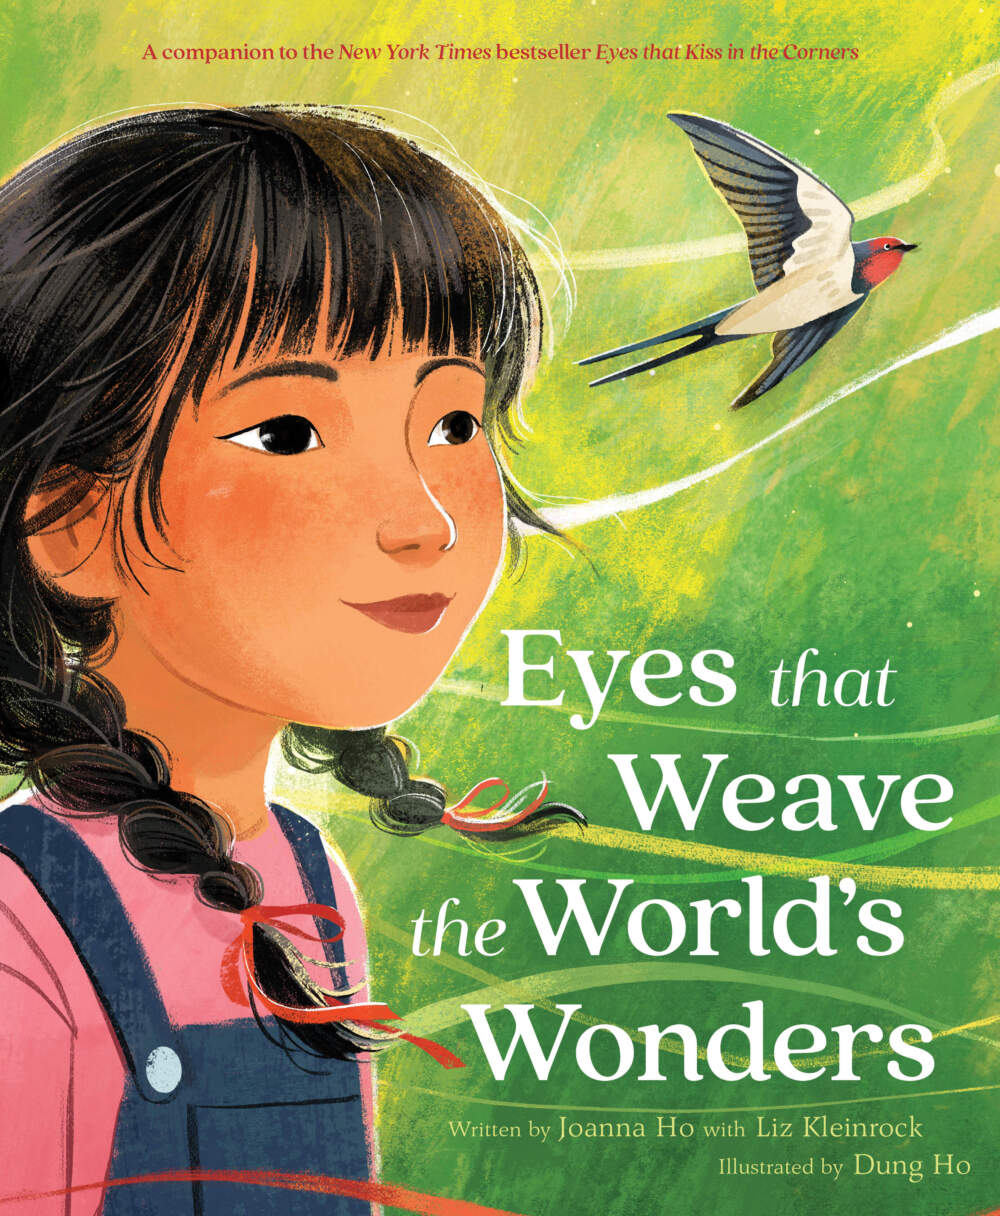 The cover of “Eyes that Weave the World’s Wonders.” (Courtesy)